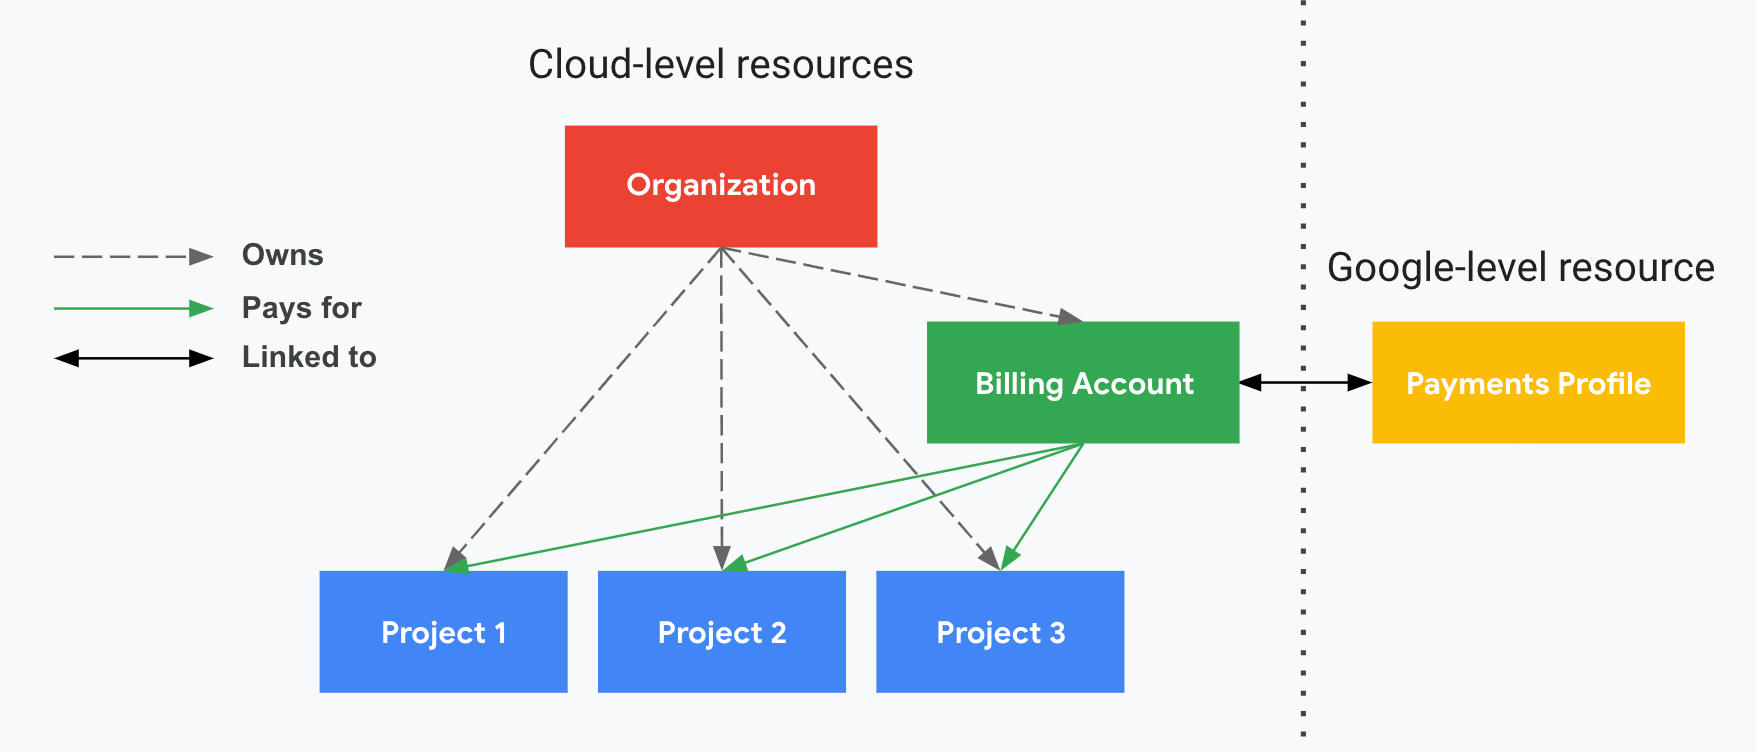 Describes how projects relate to your Cloud Billing account,
         the organization, and your Google payments profile. One side shows
         your Google Cloud-level resources (organization,
         Cloud Billing account and associated projects) and the other
         side, divided by a vertical dotted line, shows your Google-level
         resource (a Google payments profile). Your projects are paid for by
         your Cloud Billing account, which is linked to a
         Google payments profile. The organization controls ownership of the
         Cloud Billing account using IAM.